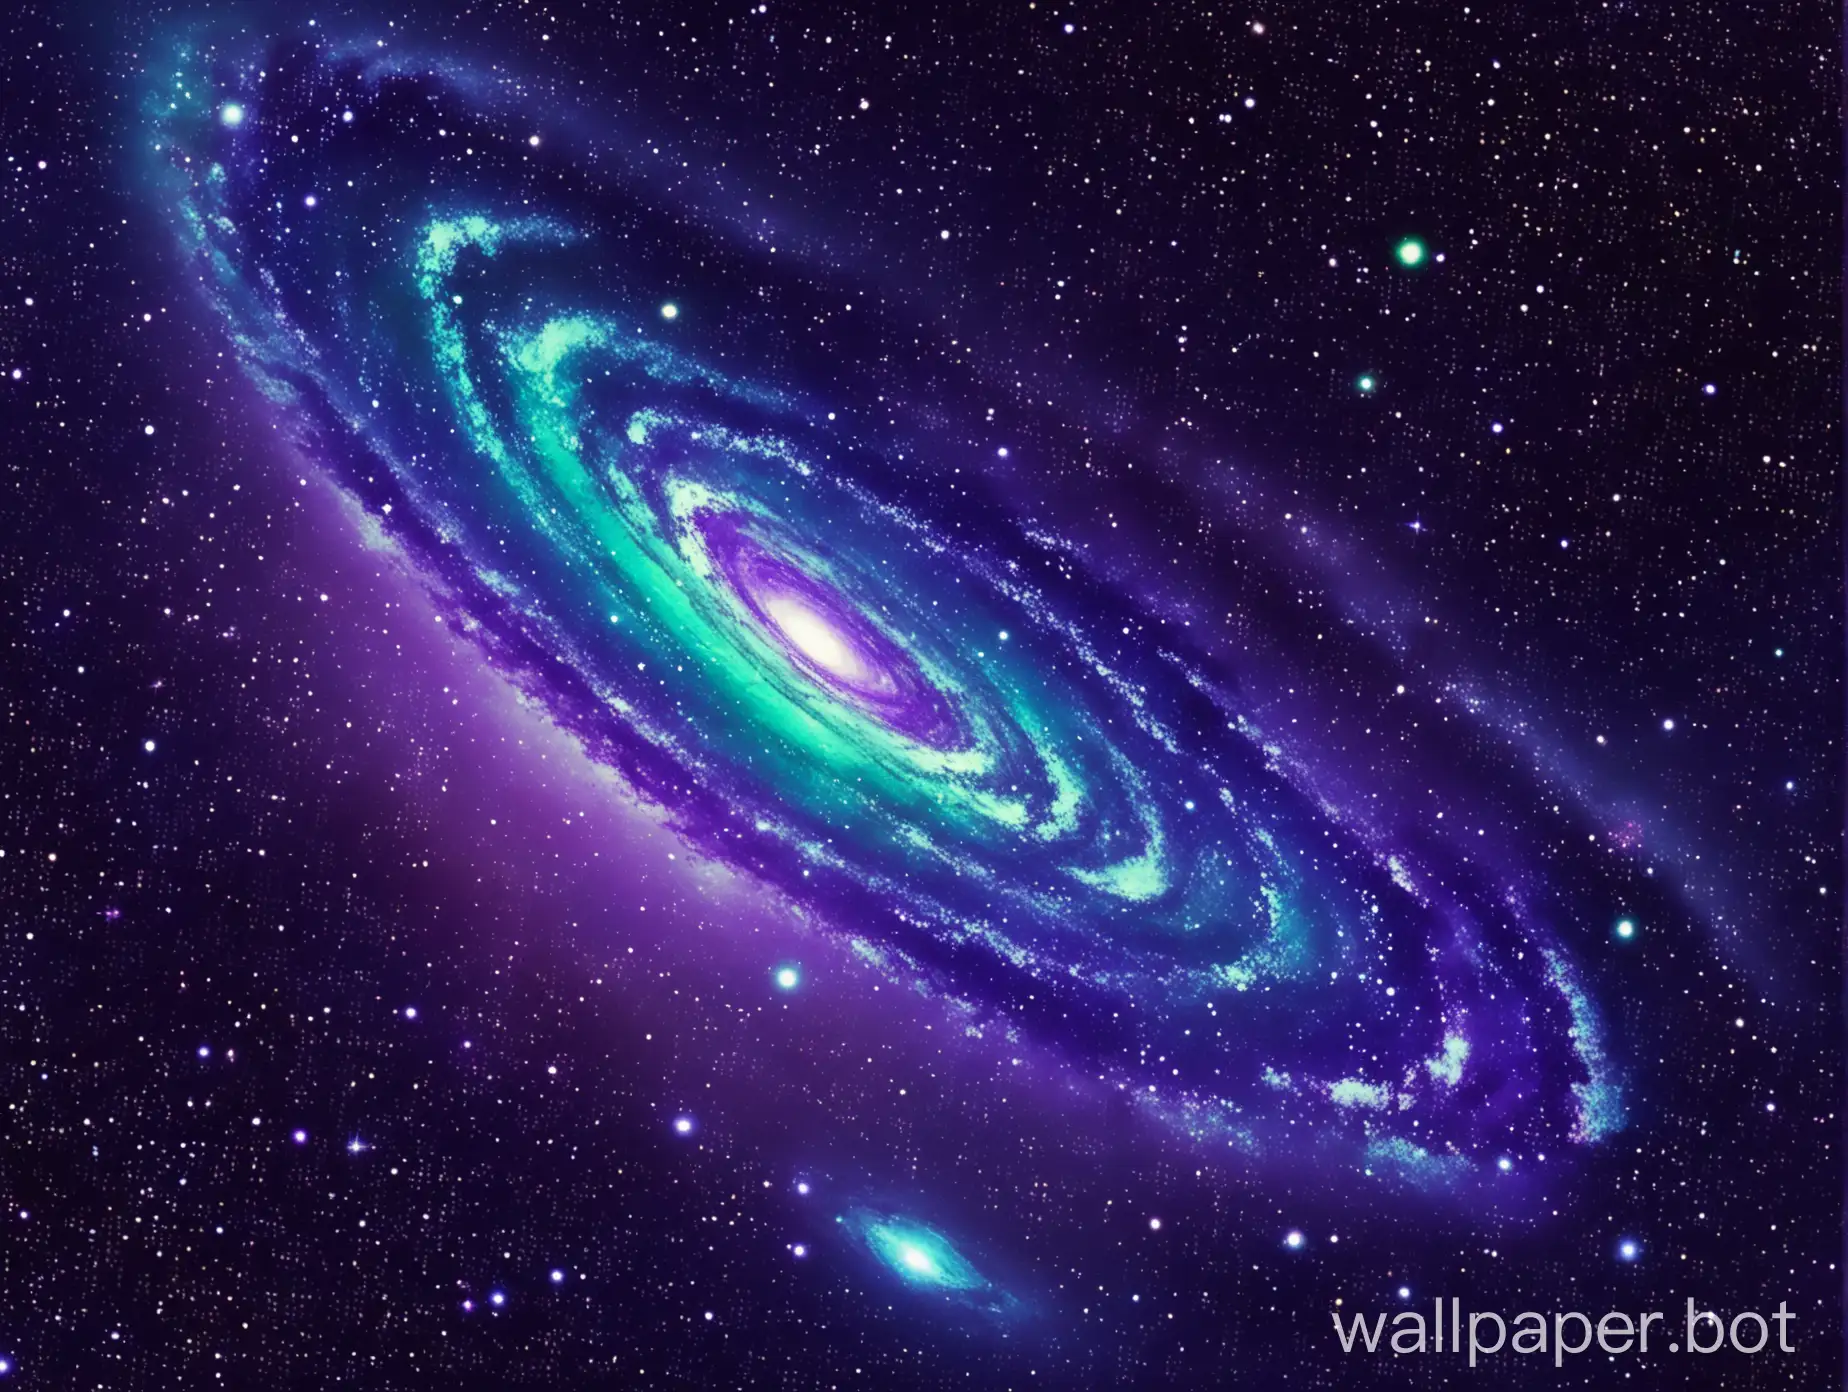 serene picture of a galaxy with blues greens and purples viewed from a small spaceship